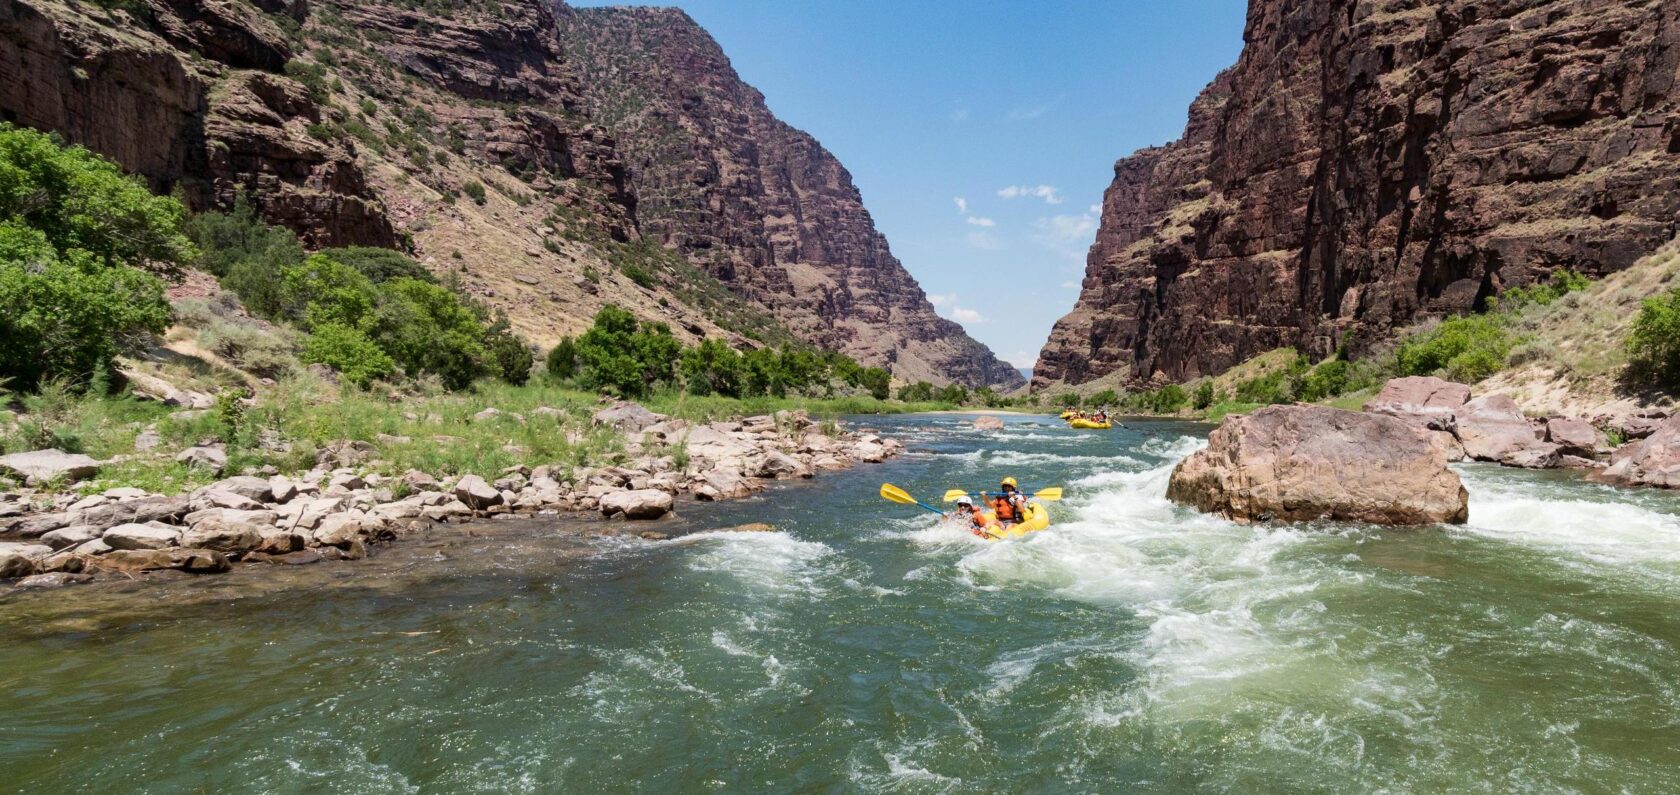 Inflatable kayakers maneuver through a rapid on the Green River through Gates of Lodore.